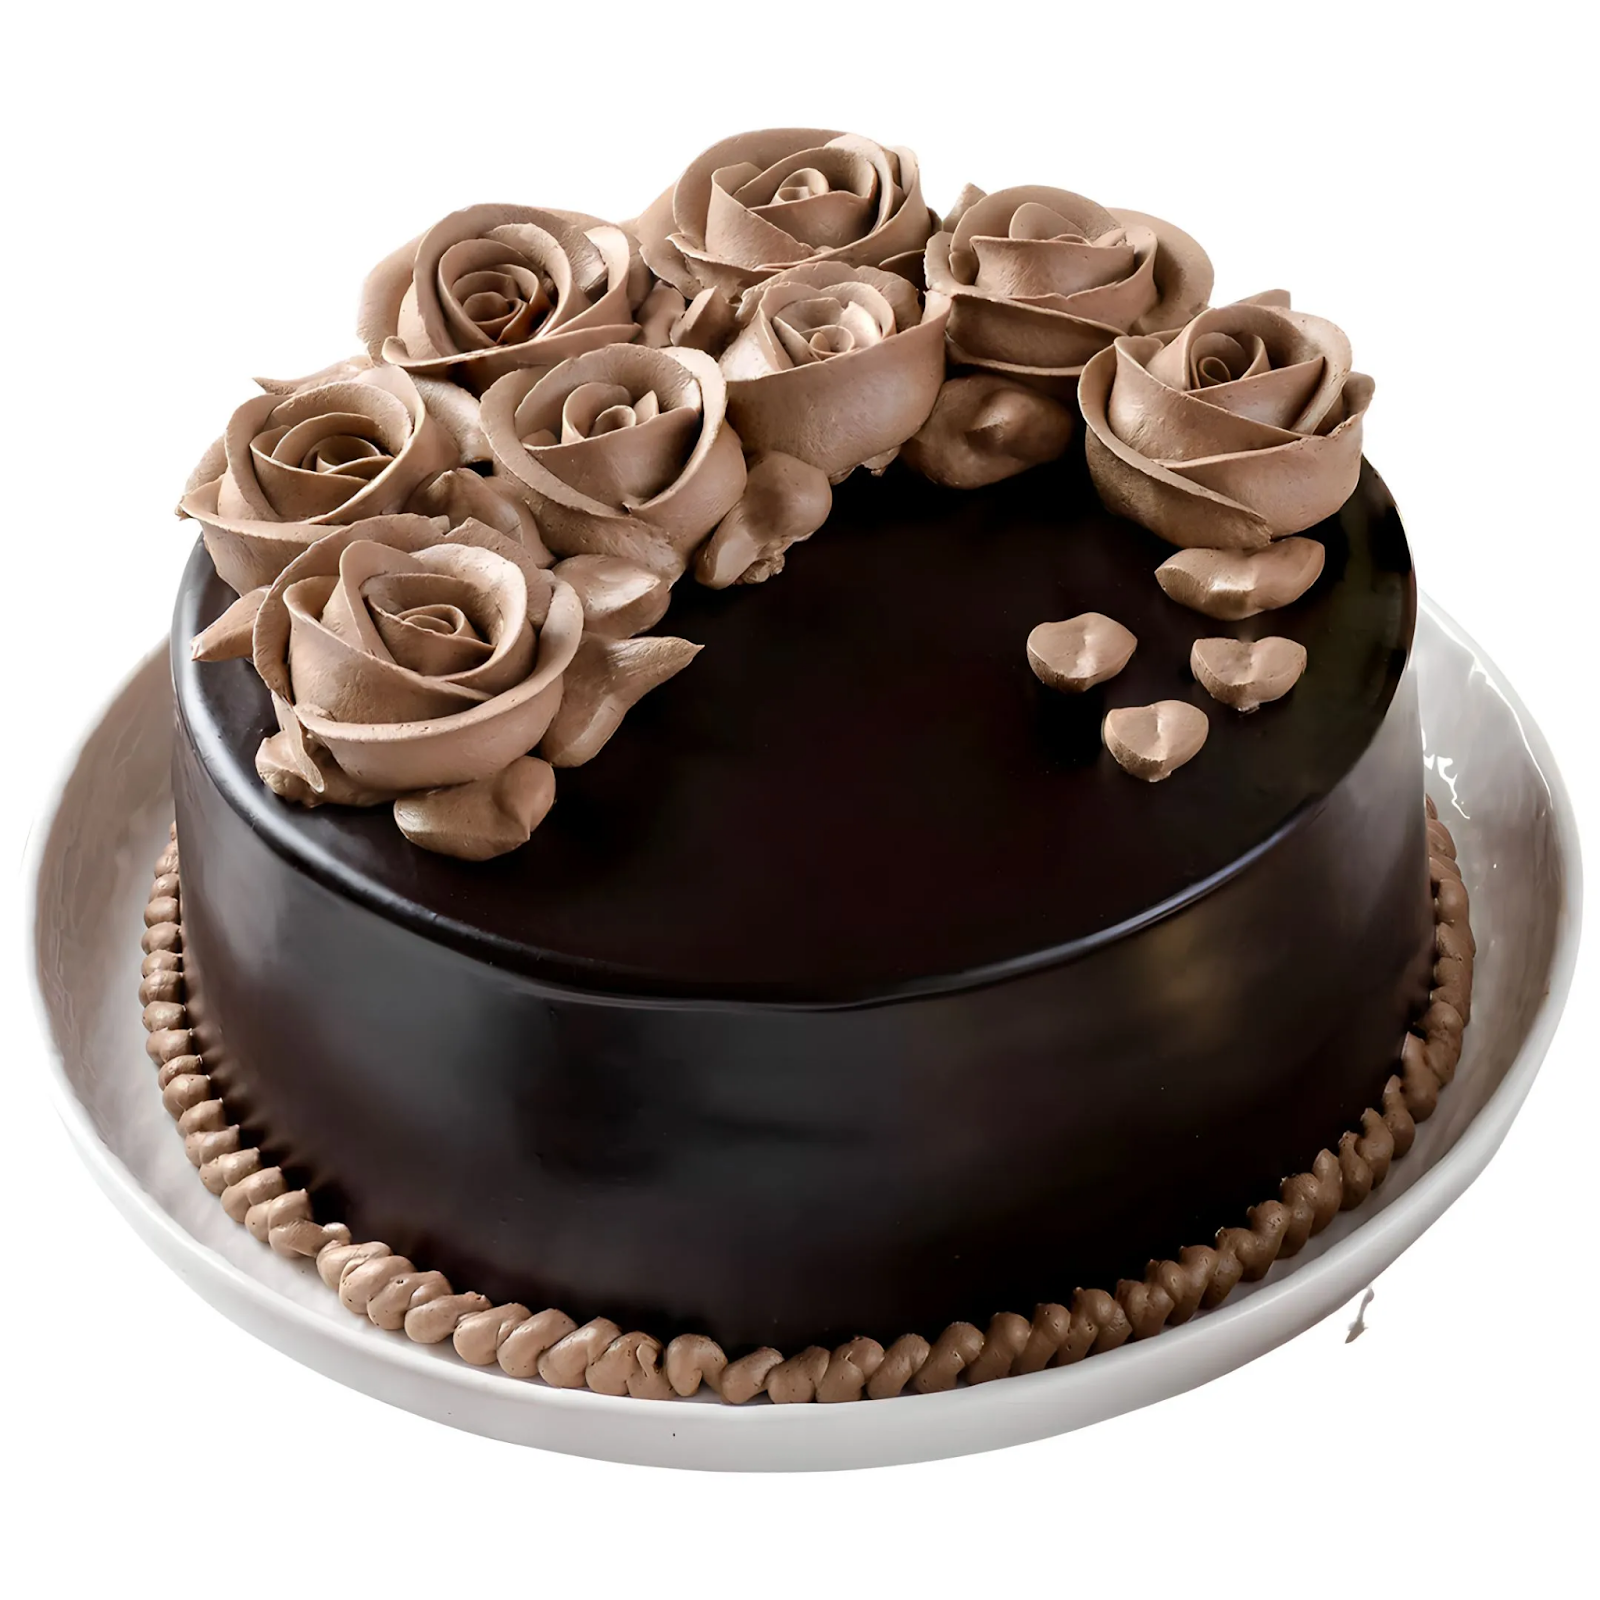 Rose Paradise Chocolate Eggless Cake by Belly Amy's